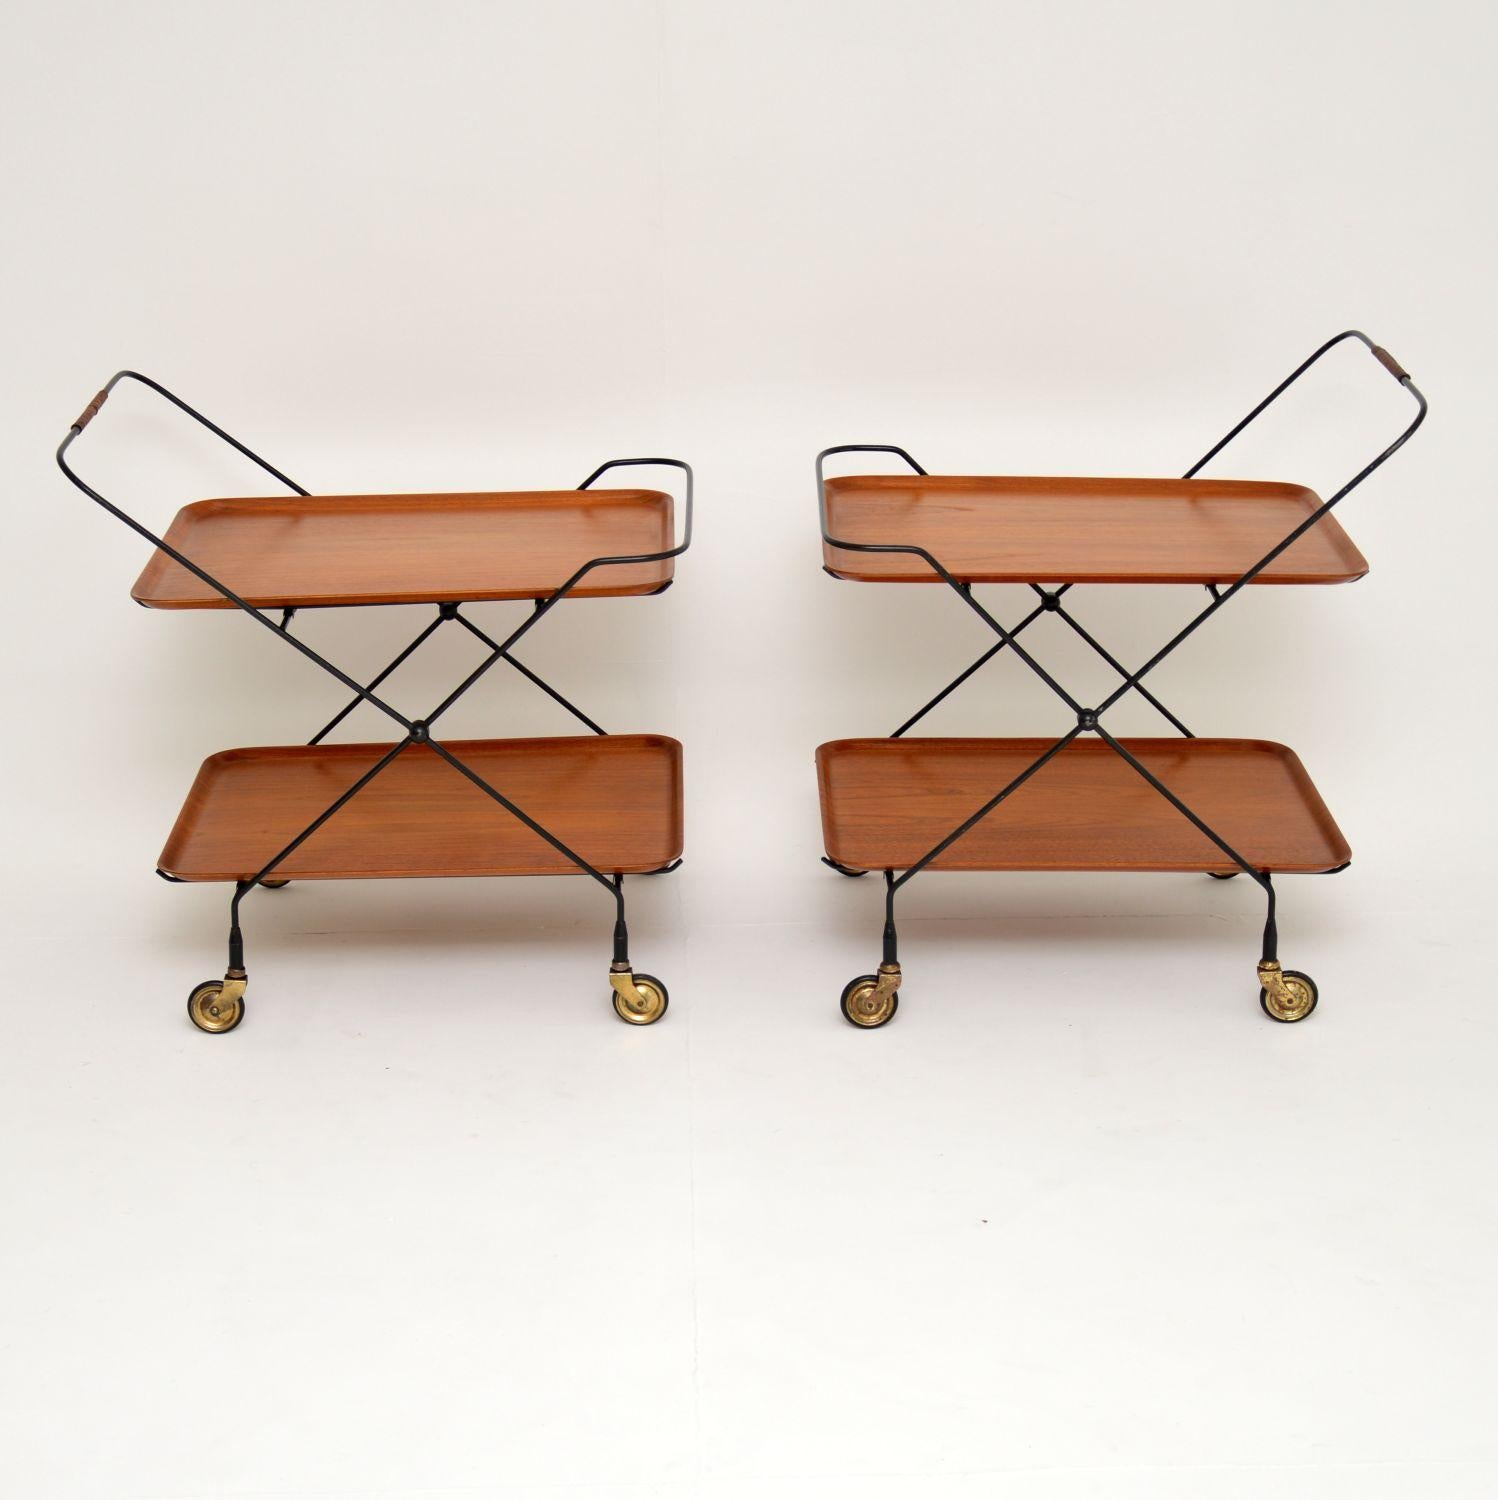 A stunning pair of vintage side tables / serving trolleys, these were made in Sweden and date from the 1960’s. They have four loose trays in teak which can all be removed. The trays have all been stripped and re-polished, they are in superb